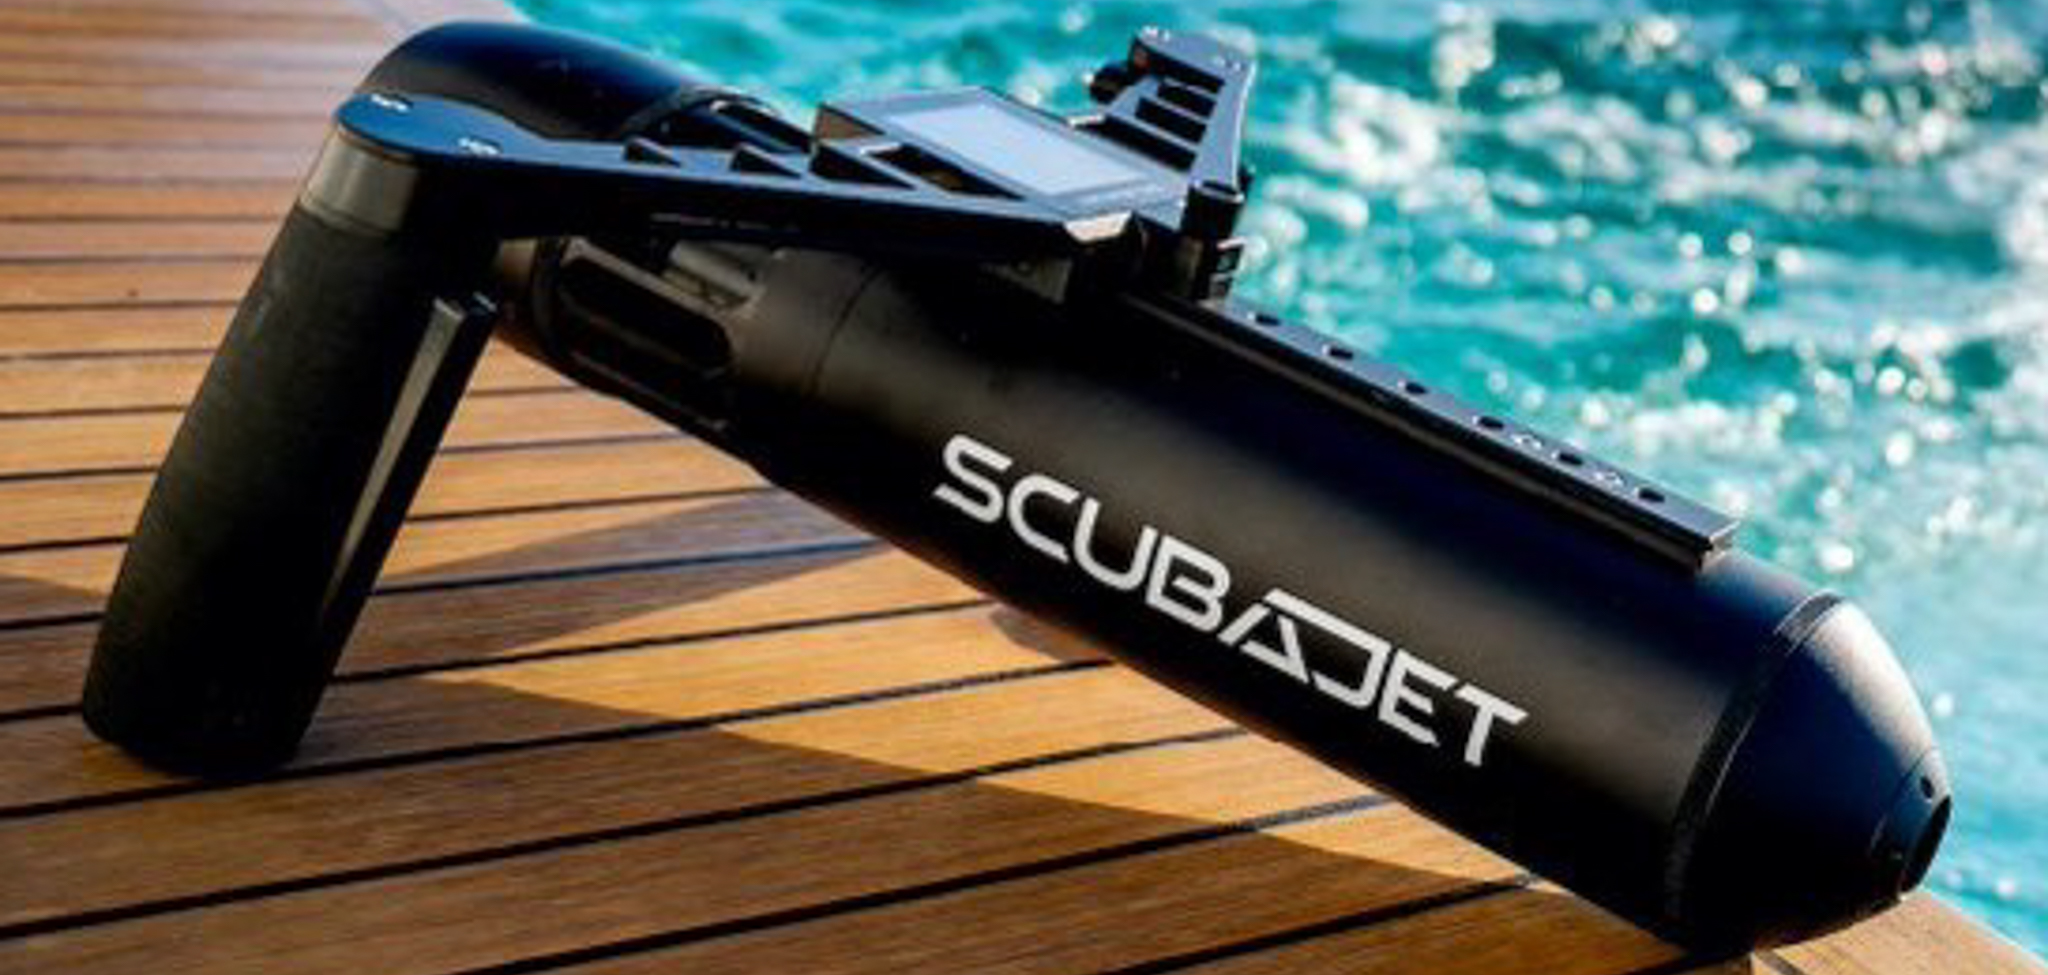 Scuba Jet Collection - Underwater Scooters